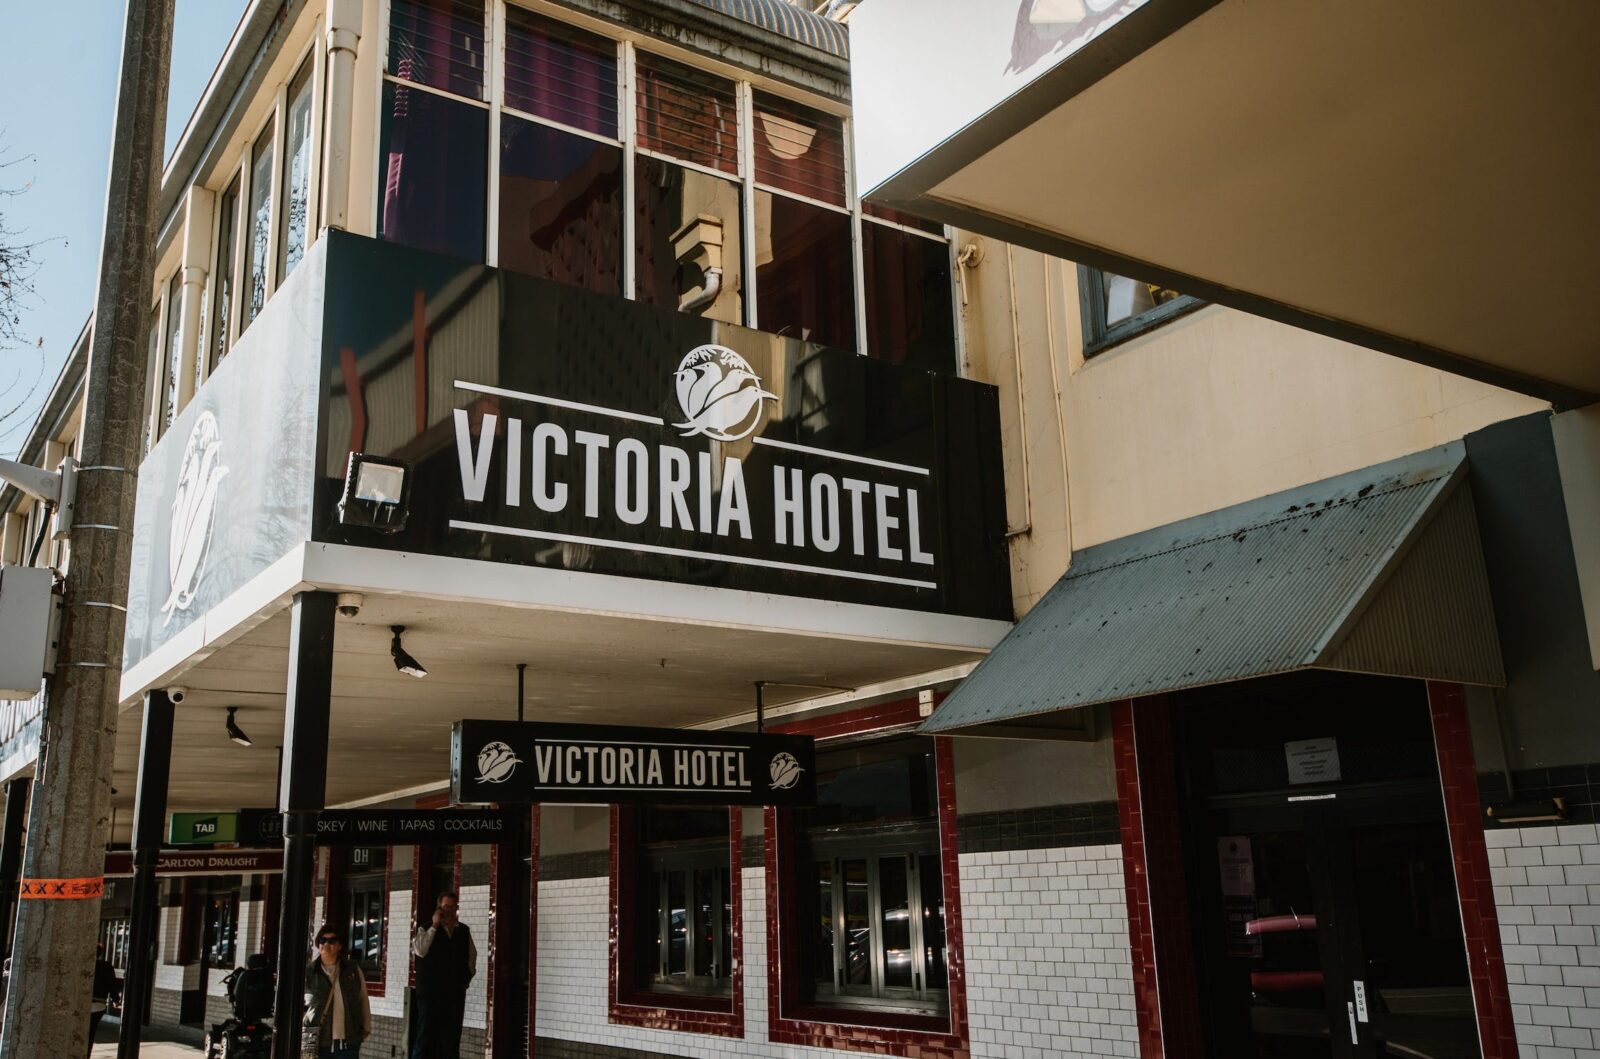 The Victoria Hotel - Front